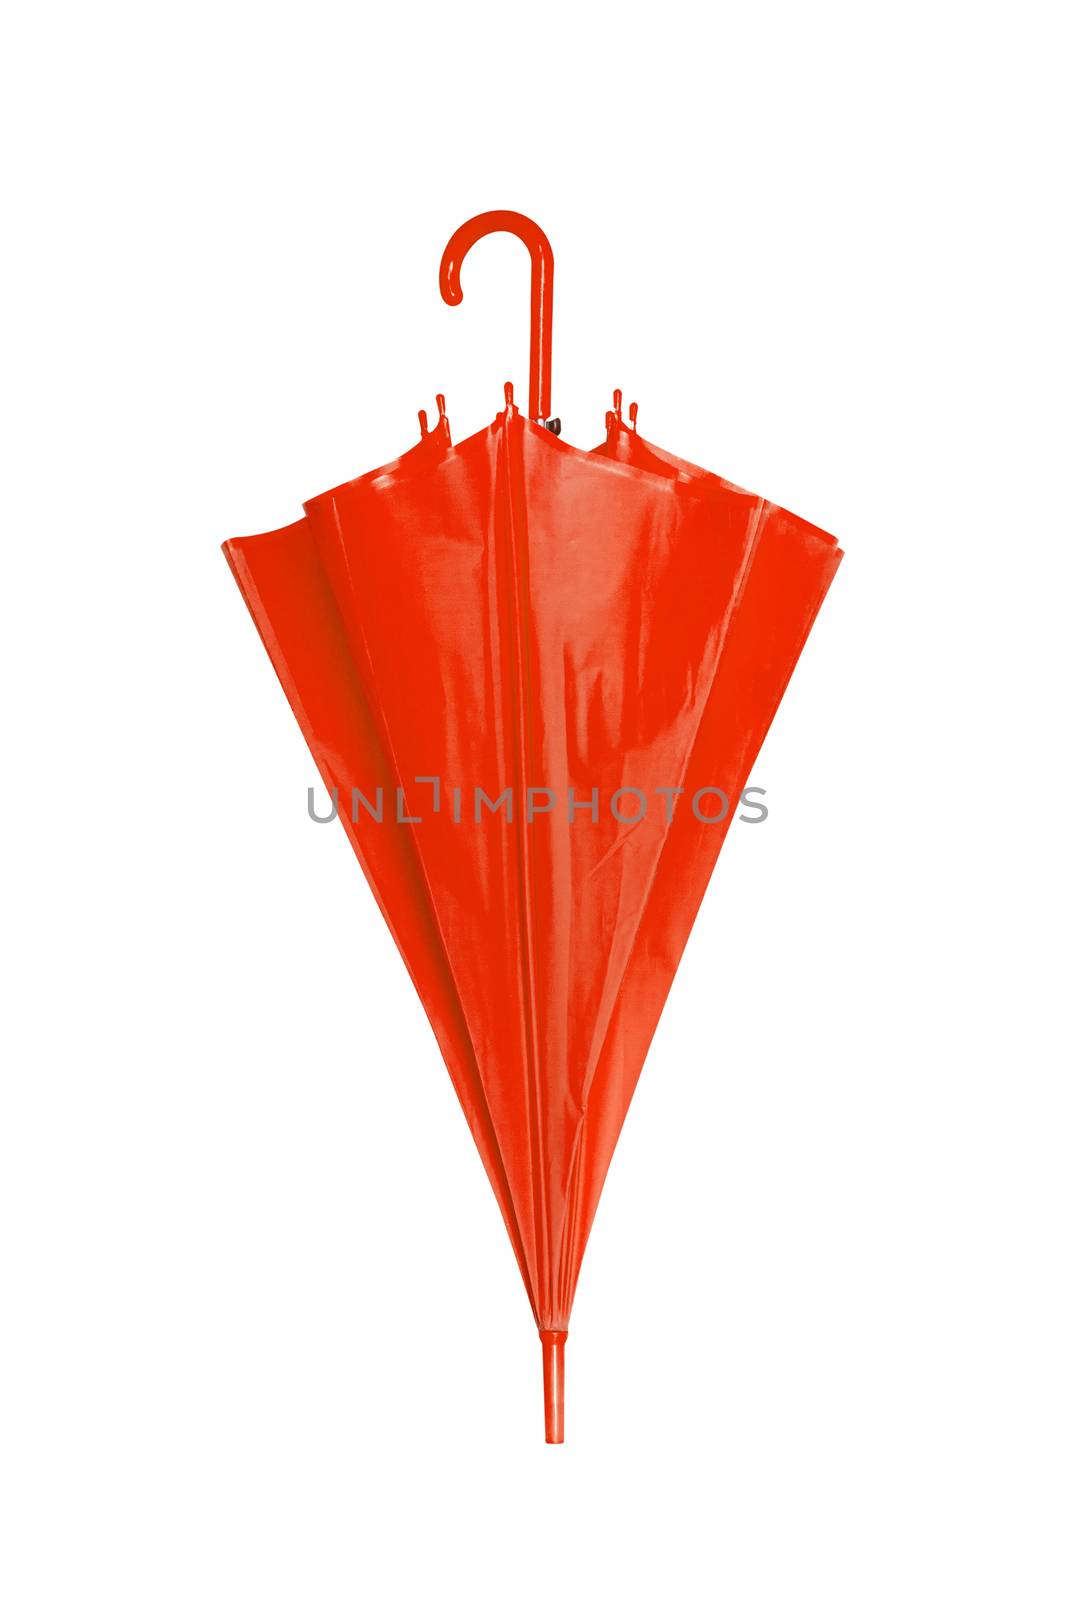 Red umbrella isolated on a white background